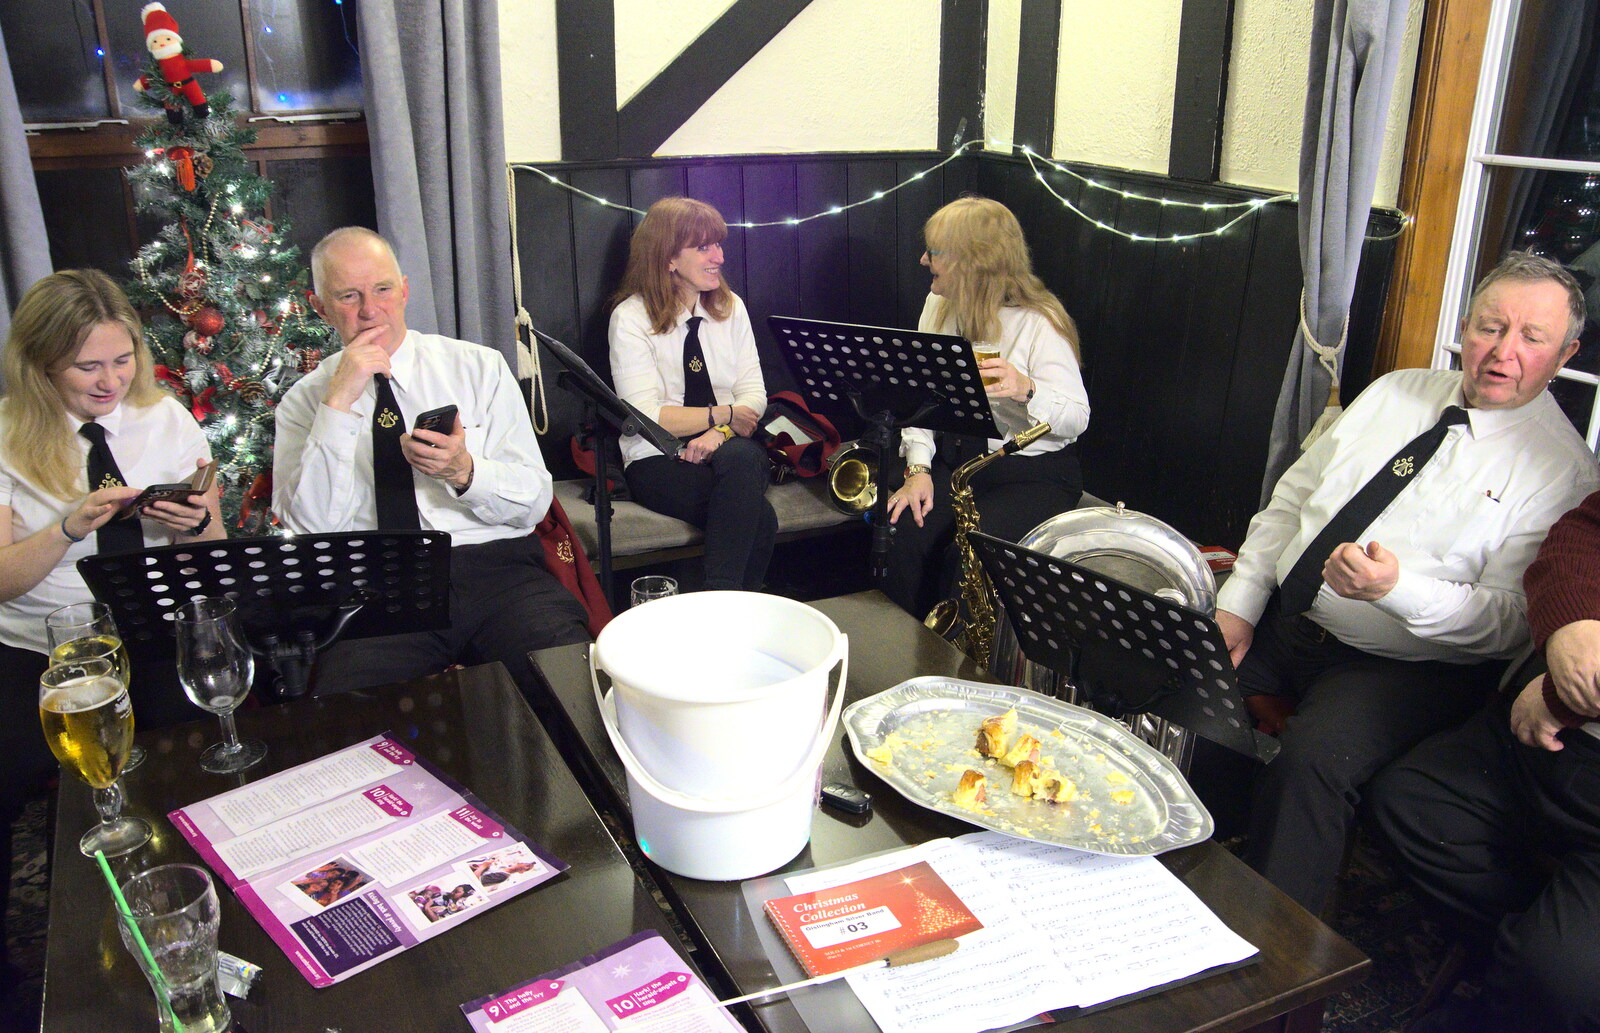 The GSB hang out in the Cherry Tree from The Gislingham Silver Band at Thornham and Yaxley, Suffolk - 19th December 2022